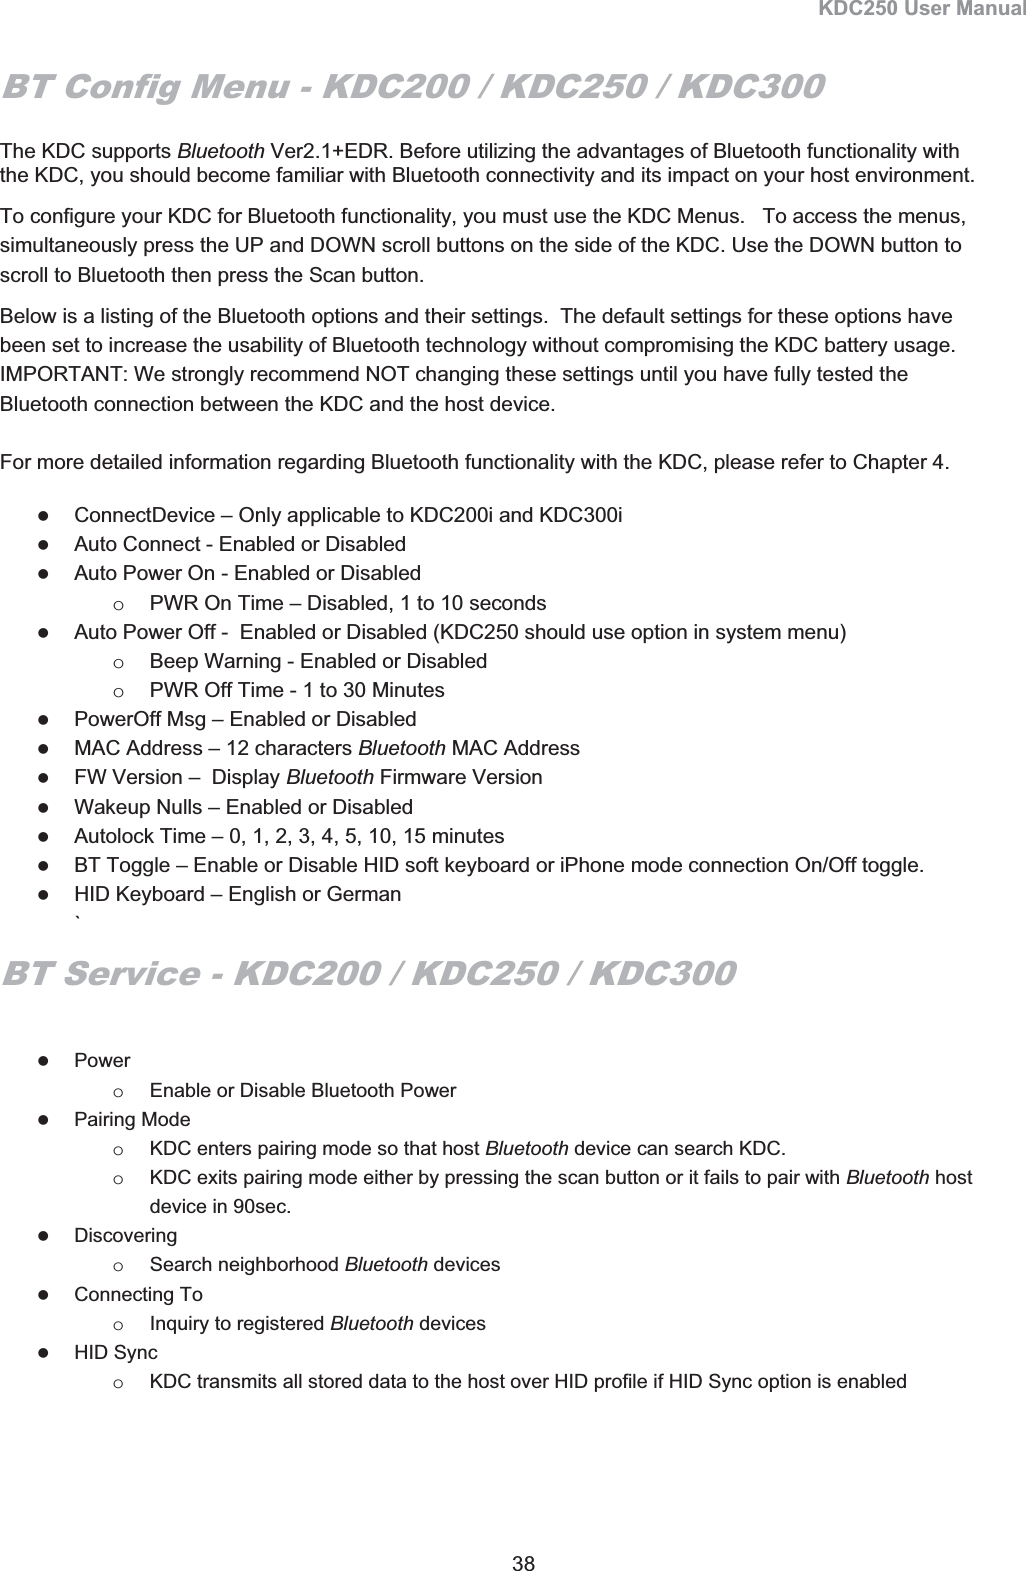 KDC250 User Manual 38 BT Config Menu - KDC200 / KDC250 / KDC300The KDC supports Bluetooth Ver2.1+EDR. Before utilizing the advantages of Bluetooth functionality with the KDC, you should become familiar with Bluetooth connectivity and its impact on your host environment.  To configure your KDC for Bluetooth functionality, you must use the KDC Menus.   To access the menus, simultaneously press the UP and DOWN scroll buttons on the side of the KDC. Use the DOWN button to scroll to Bluetooth then press the Scan button.  Below is a listing of the Bluetooth options and their settings.  The default settings for these options have been set to increase the usability of Bluetooth technology without compromising the KDC battery usage.   IMPORTANT: We strongly recommend NOT changing these settings until you have fully tested the Bluetooth connection between the KDC and the host device.  For more detailed information regarding Bluetooth functionality with the KDC, please refer to Chapter 4. zConnectDevice – Only applicable to KDC200i and KDC300i zAuto Connect - Enabled or Disabled  zAuto Power On - Enabled or Disabled  o  PWR On Time – Disabled, 1 to 10 seconds  zAuto Power Off -  Enabled or Disabled (KDC250 should use option in system menu) o  Beep Warning - Enabled or Disabled  o  PWR Off Time - 1 to 30 Minutes  zPowerOff Msg – Enabled or Disabled zMAC Address – 12 characters Bluetooth MAC Address  zFW Version –  Display Bluetooth Firmware Version zWakeup Nulls – Enabled or Disabled zAutolock Time – 0, 1, 2, 3, 4, 5, 10, 15 minutes zBT Toggle – Enable or Disable HID soft keyboard or iPhone mode connection On/Off toggle. zHID Keyboard – English or German `BT Service - KDC200 / KDC250 / KDC300zPower  o  Enable or Disable Bluetooth Power zPairing Mode o  KDC enters pairing mode so that host Bluetooth device can search KDC. o  KDC exits pairing mode either by pressing the scan button or it fails to pair with Bluetooth host device in 90sec. zDiscovering o Search neighborhood Bluetooth devices zConnecting To o  Inquiry to registered Bluetooth devices  zHID Sync o  KDC transmits all stored data to the host over HID profile if HID Sync option is enabled 